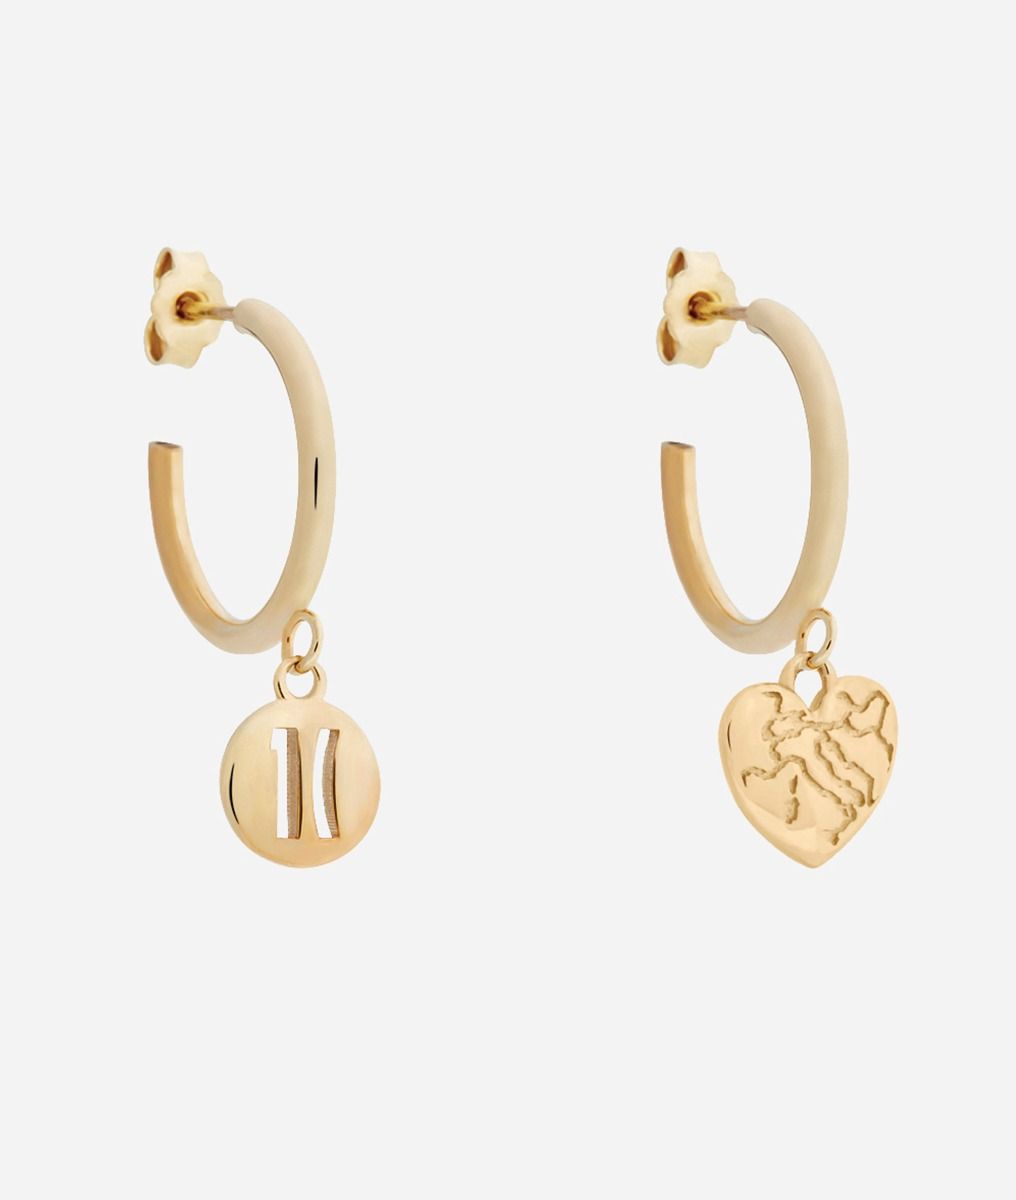 Rambla earrings with charms dipped in Yellow Gold,front